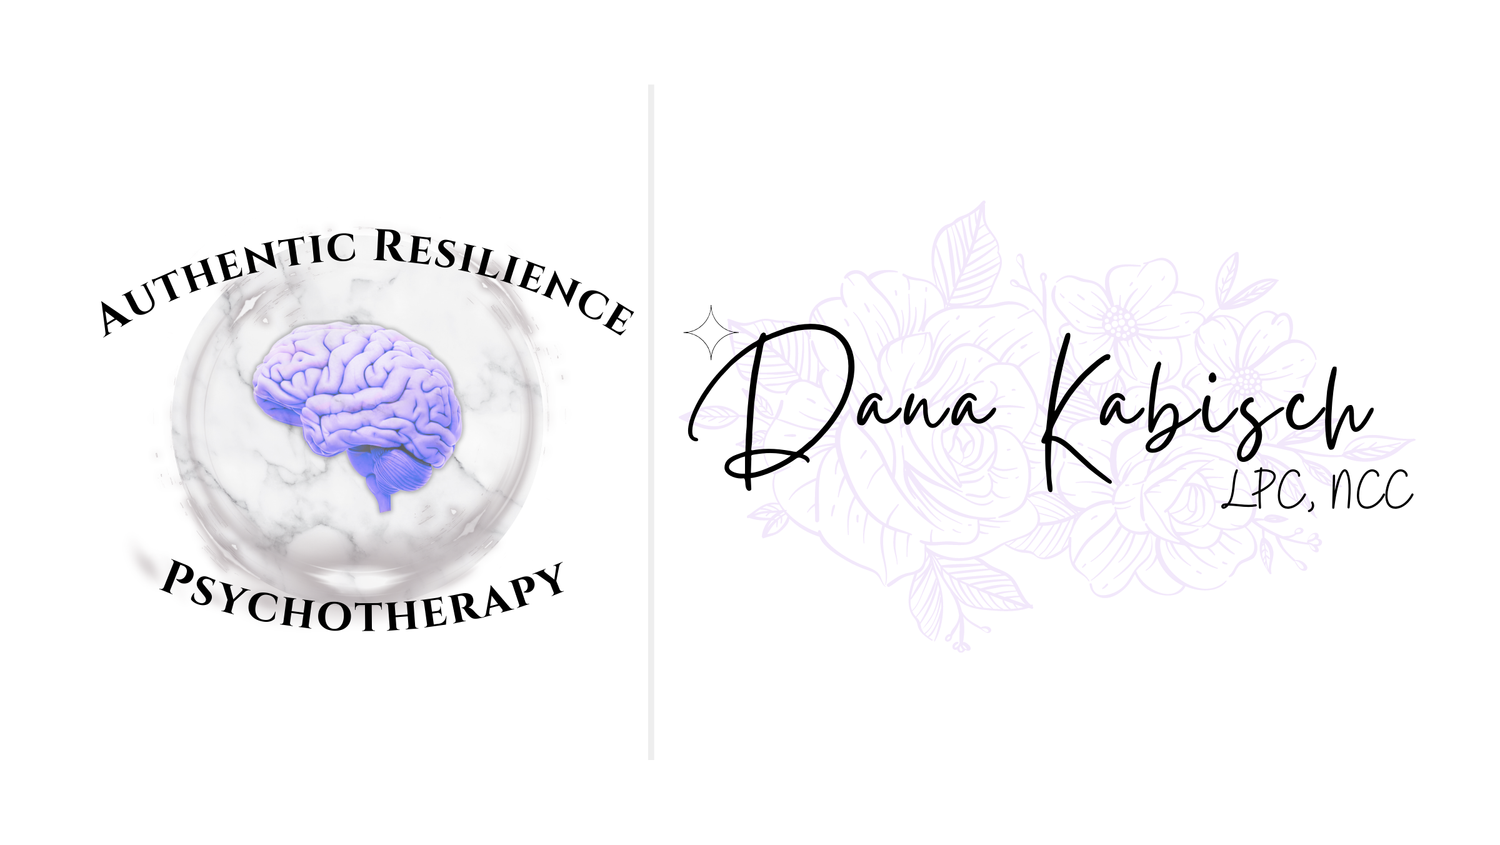 Authentic Resilience Psychotherapy, LLC